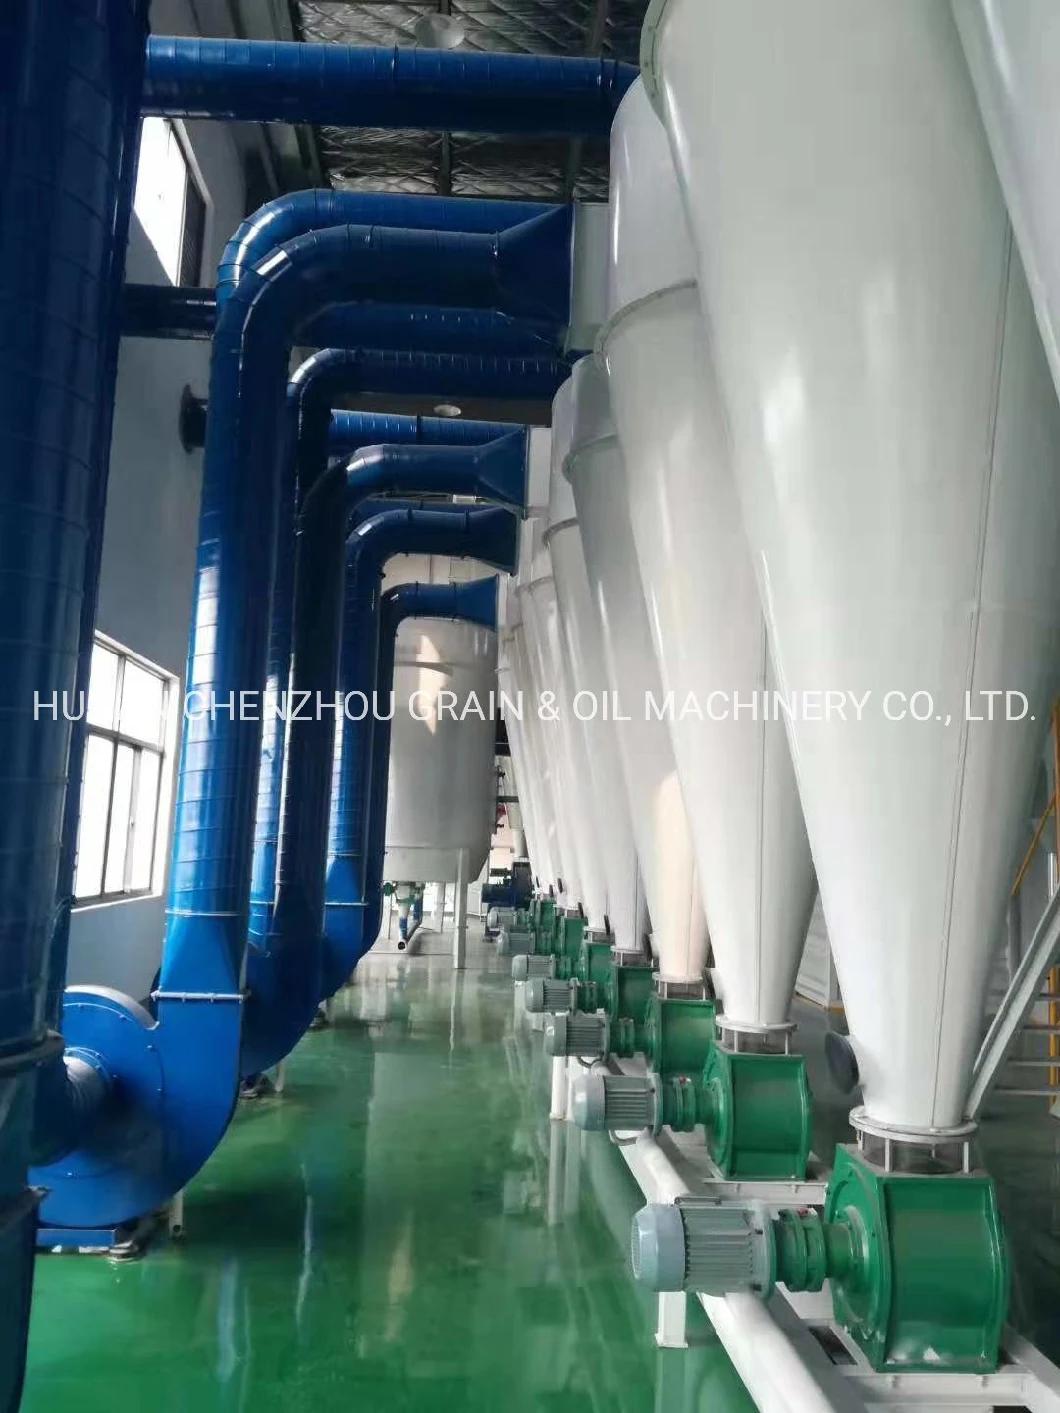 500tons Silos Final Rice Silos for Rice Mill Rcie Paddy Brown Rice Storage